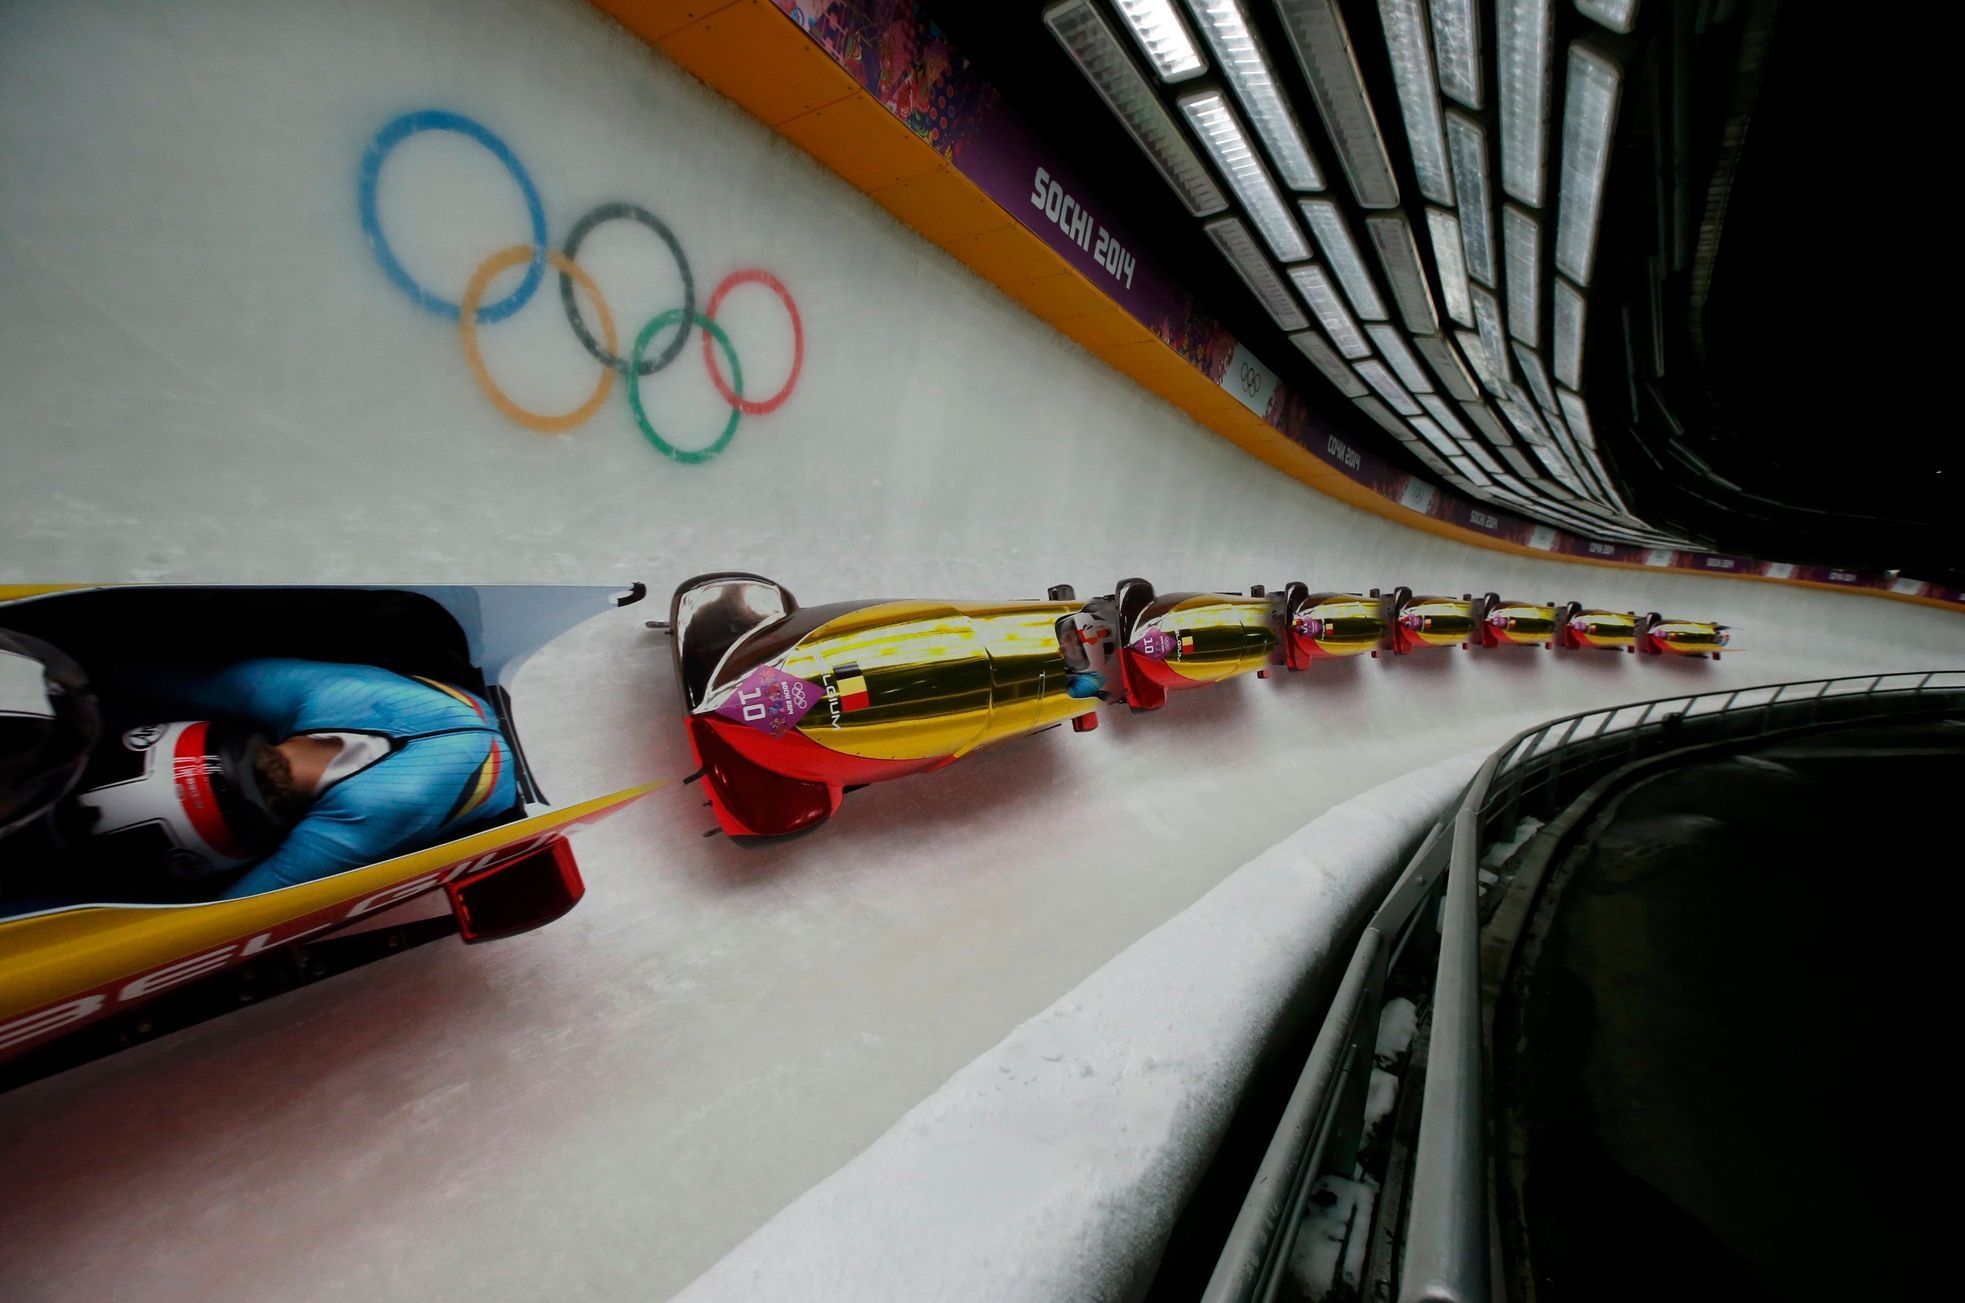 Belgium's pilot Willemsen and Marien speed down the track during the women's bobsleigh event at the 2014 Sochi Winter Olympics